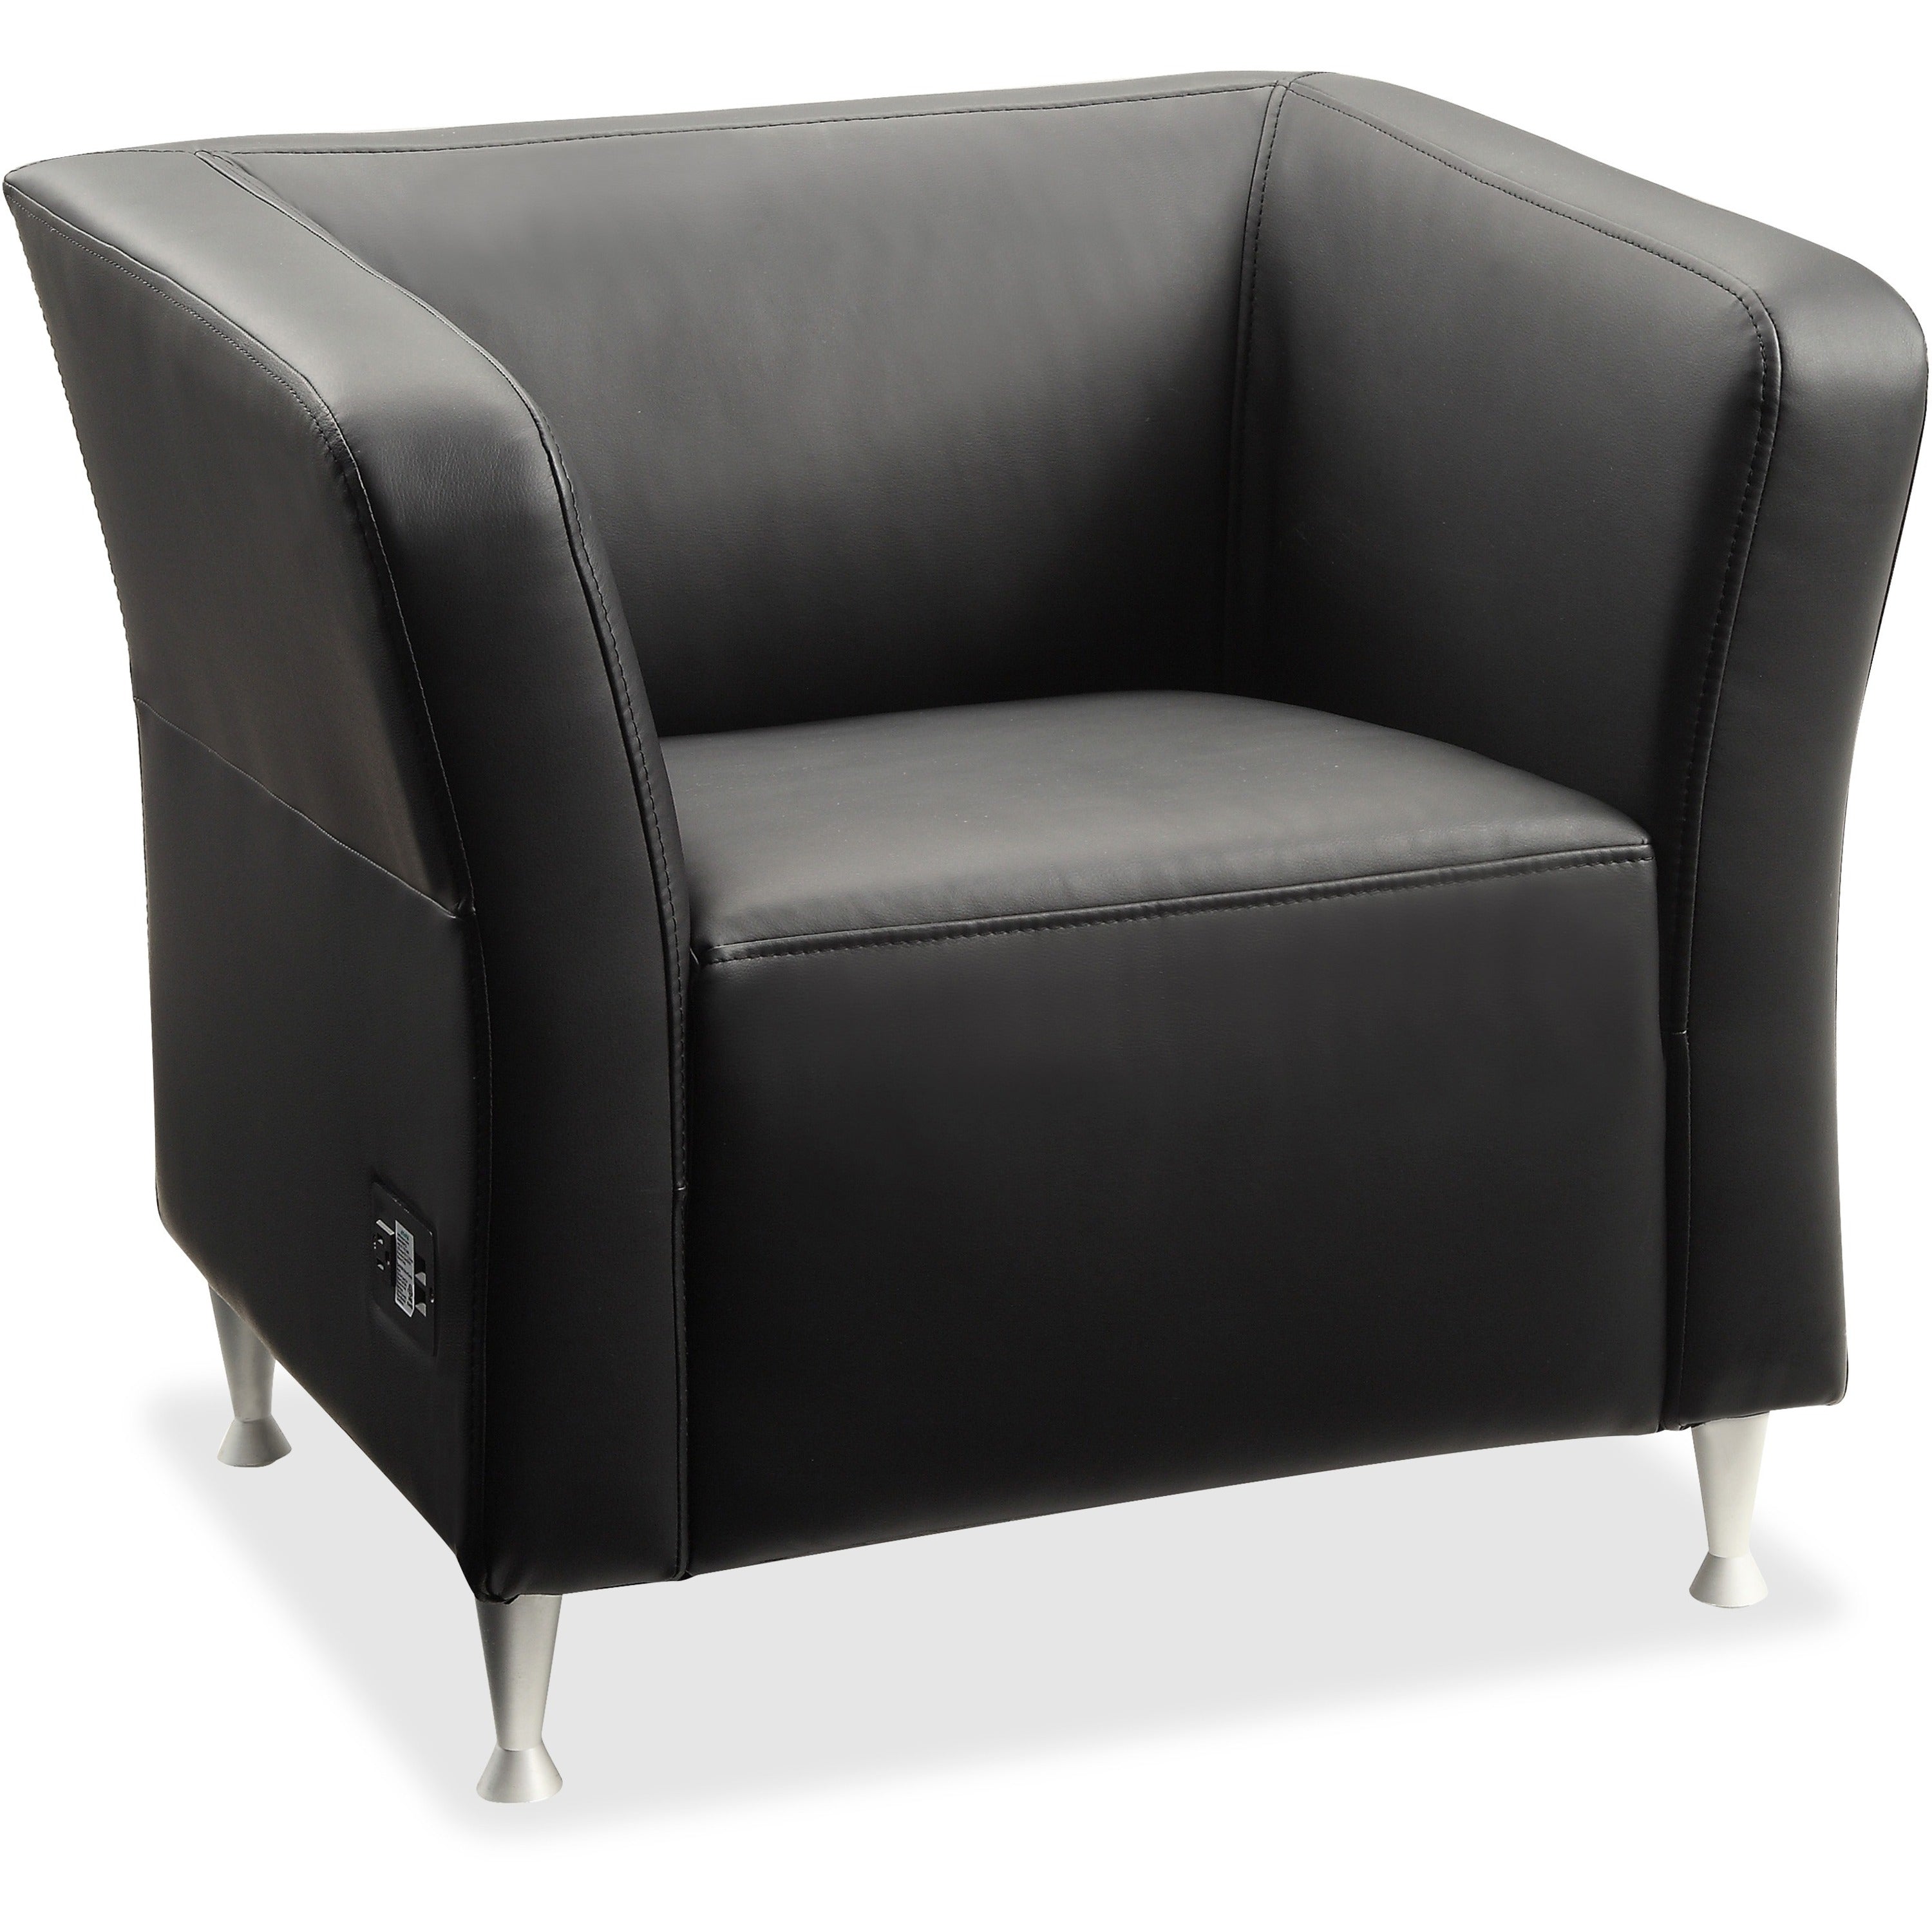 lorell-fuze-modular-series-square-lounge-chair-black-leather-seat-black-leather-back-brushed-aluminum-frame-high-back-1-each_llr86916 - 1